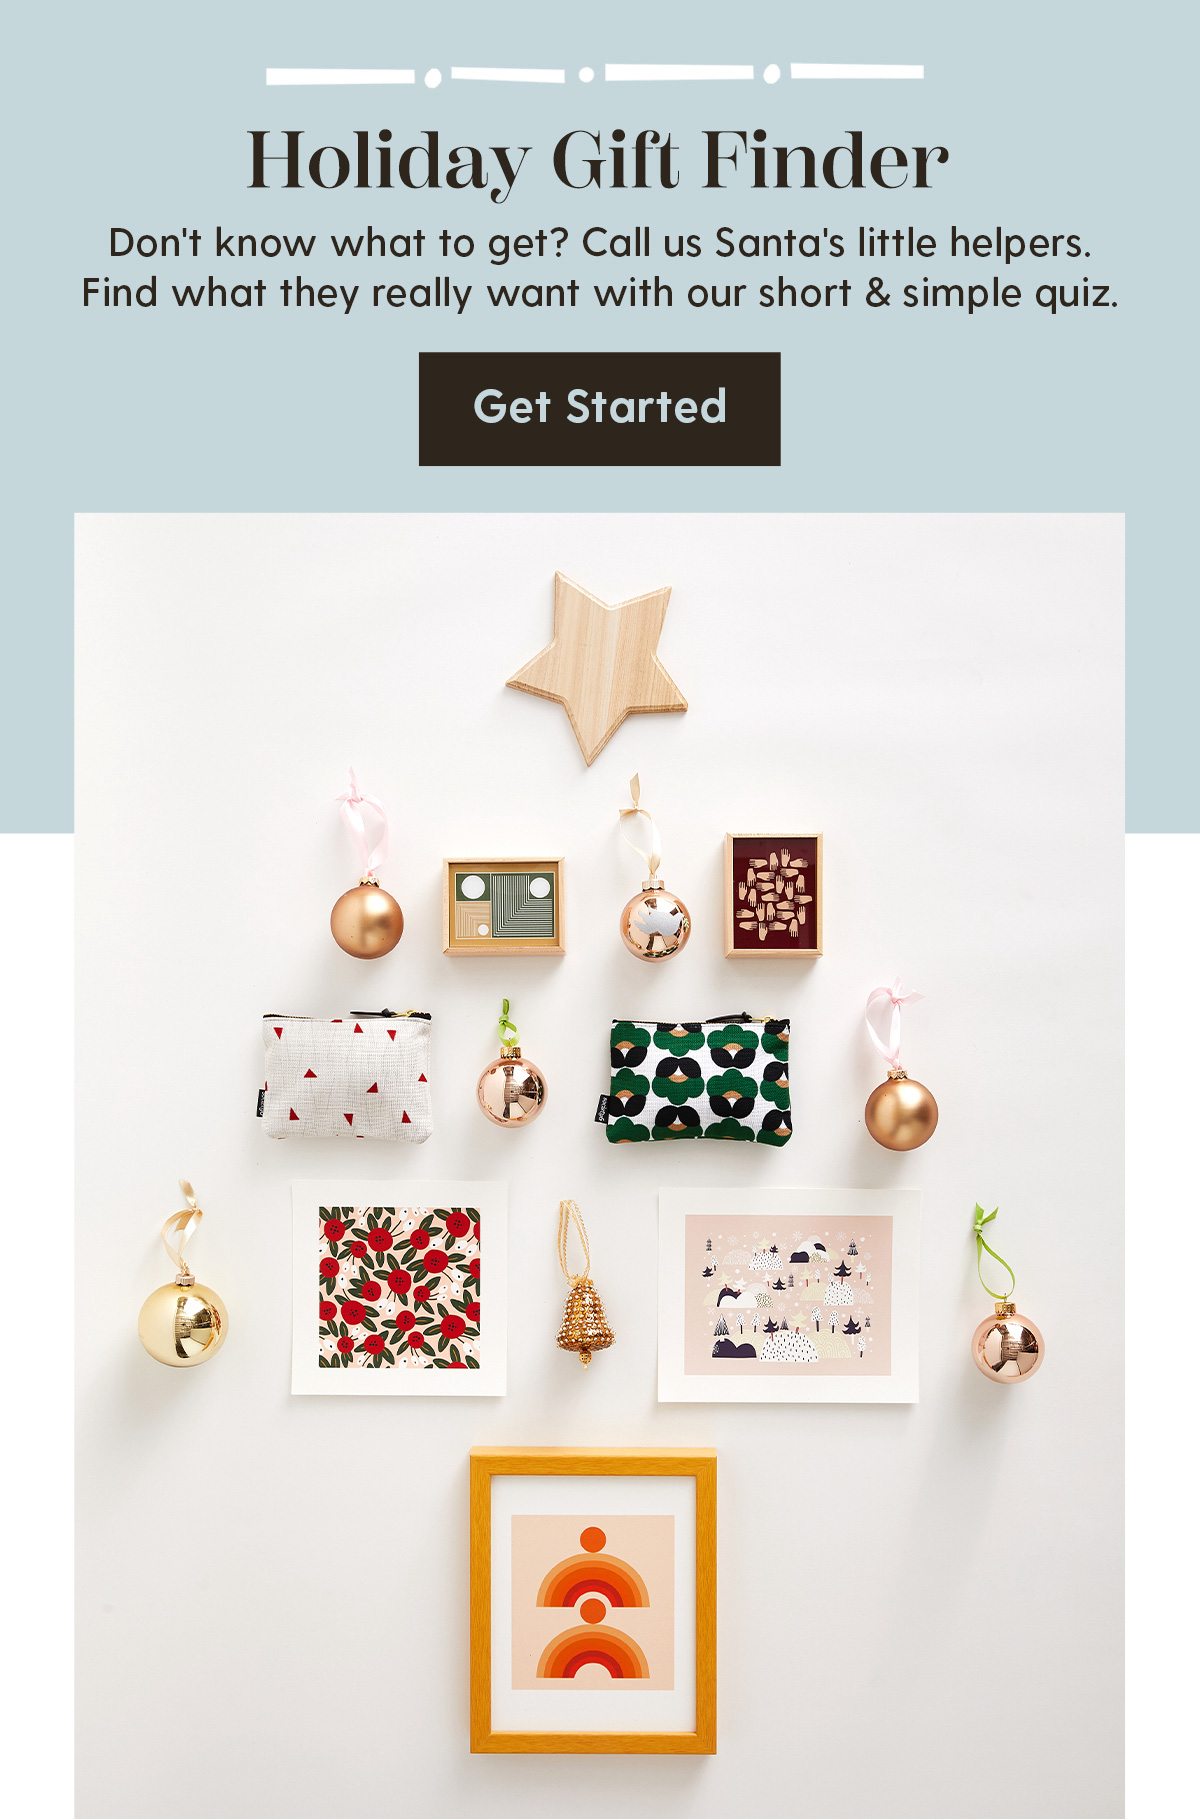 Holiday Gift Finder | Don't know what to get? Call us Santa's little helpers. Find what they really want with our short & simple quiz. | Get Started